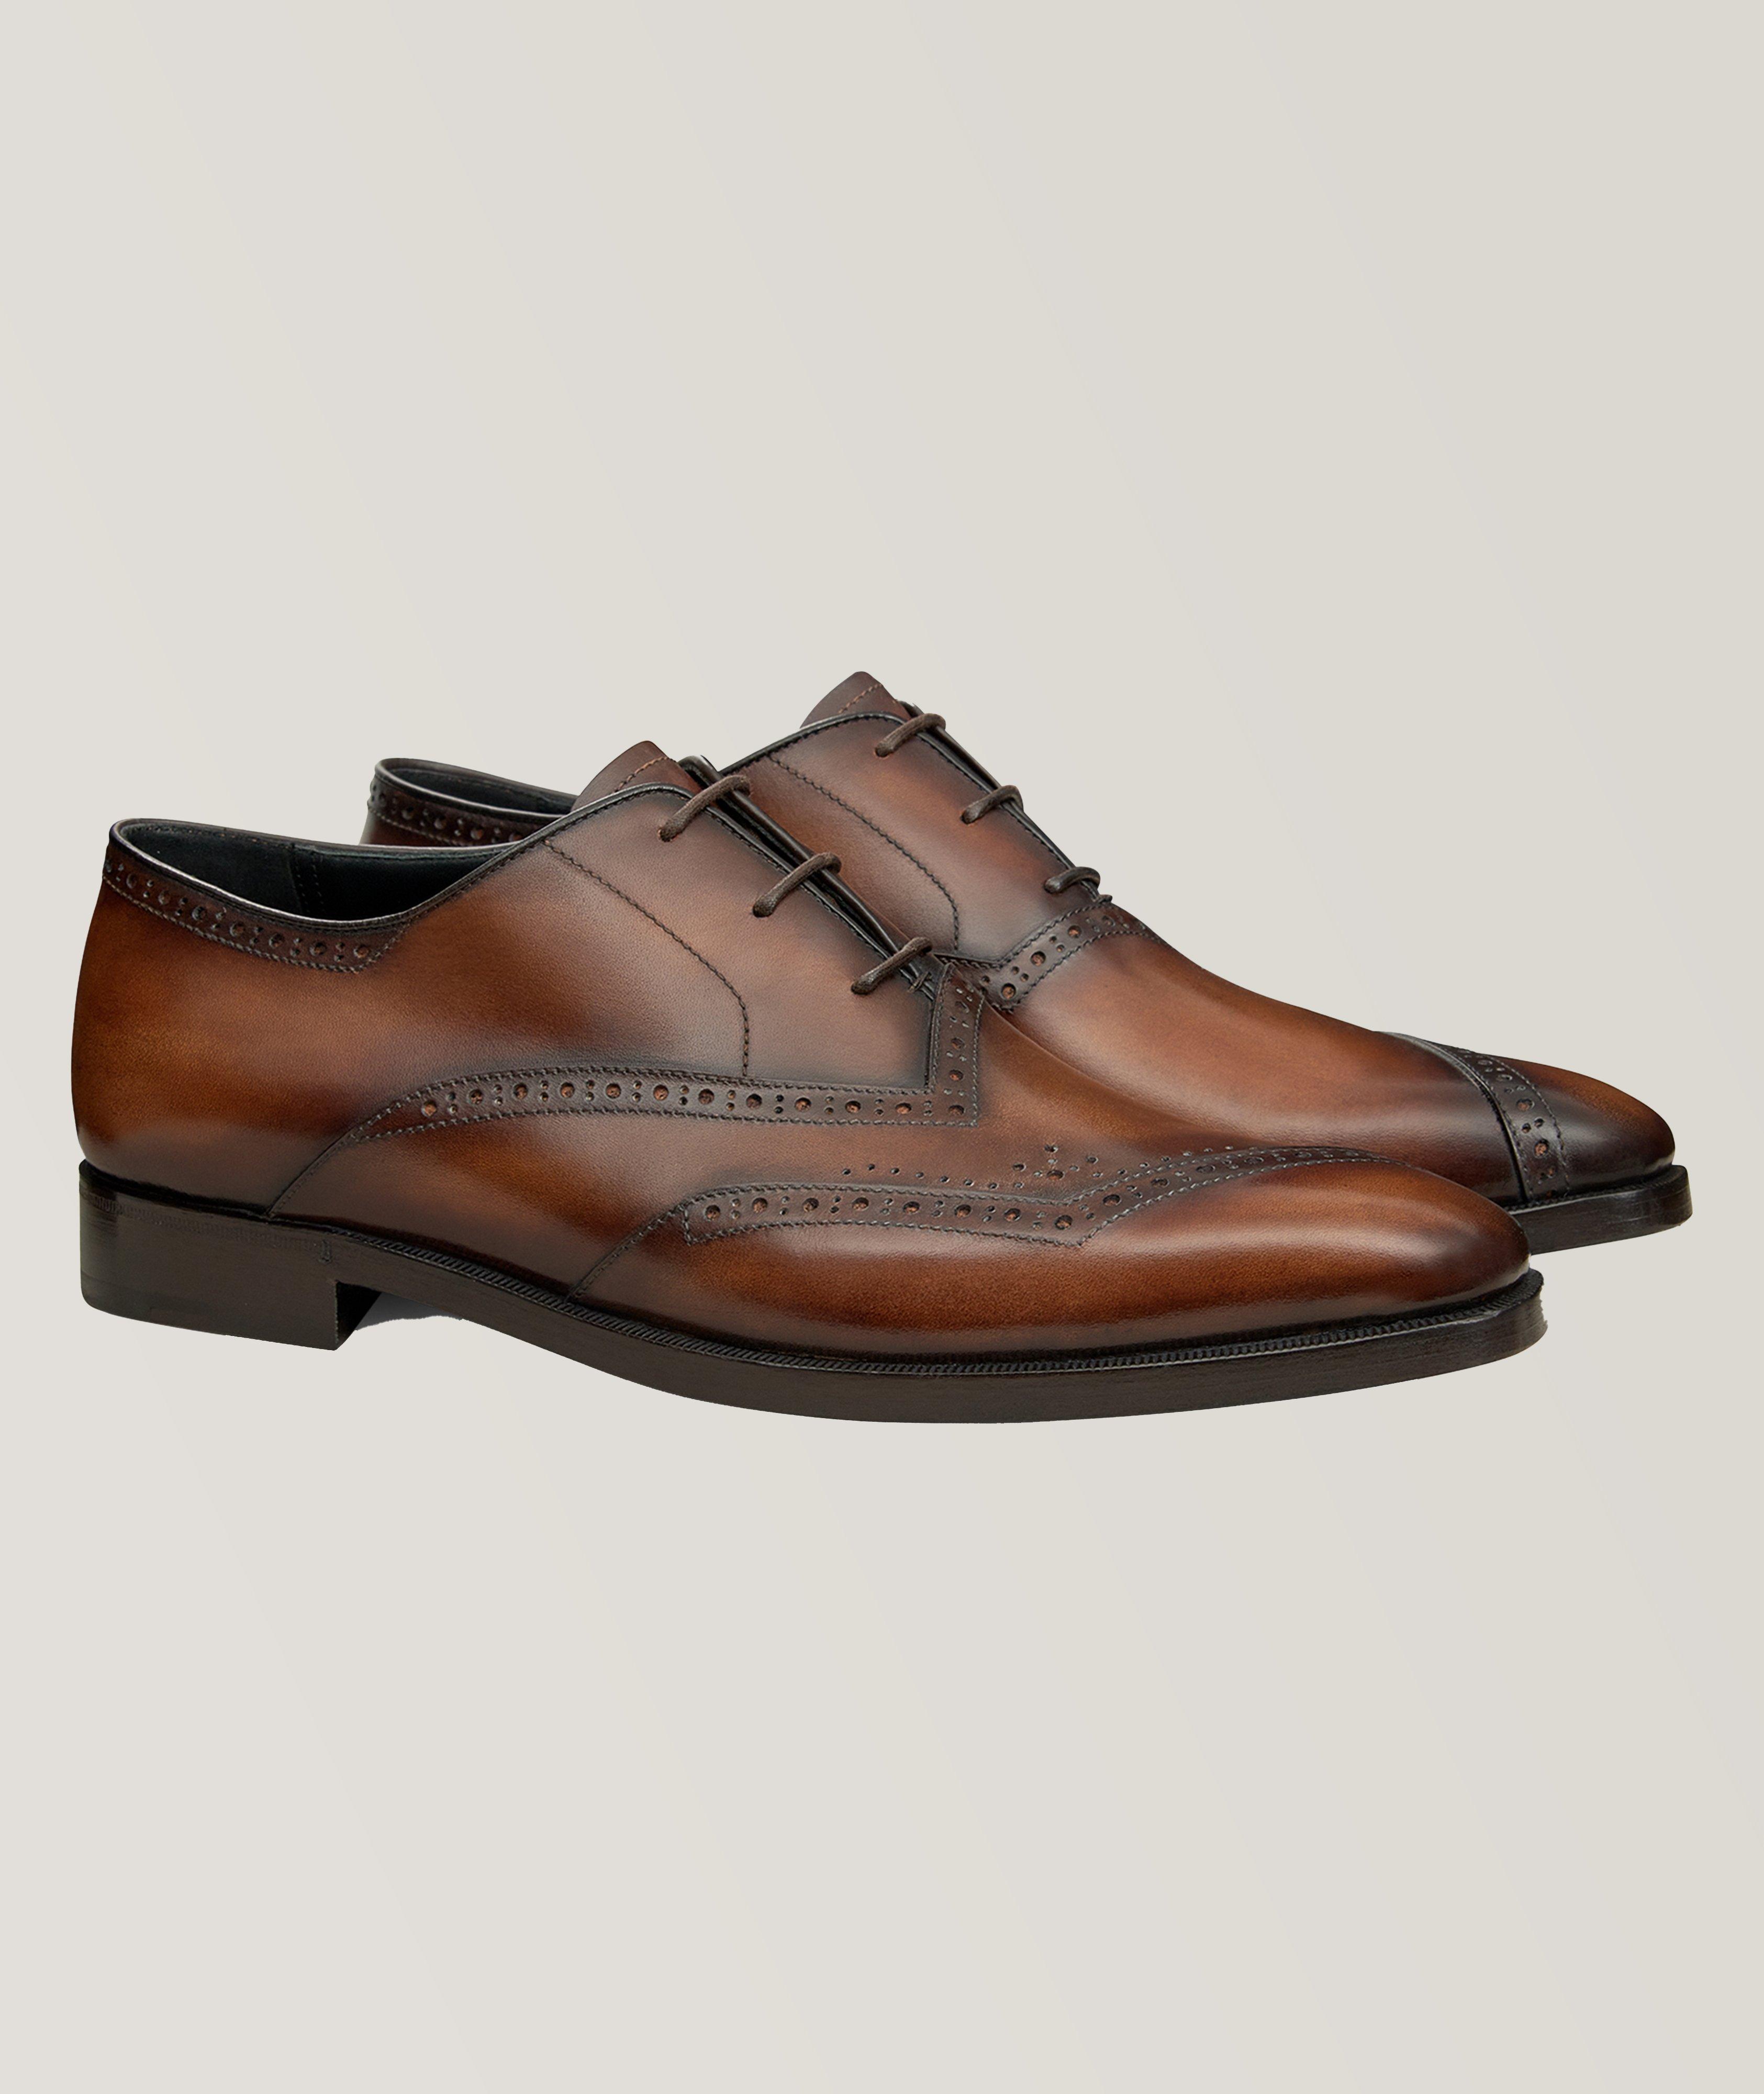 Asymmetric Broque Leather Oxford  image 1